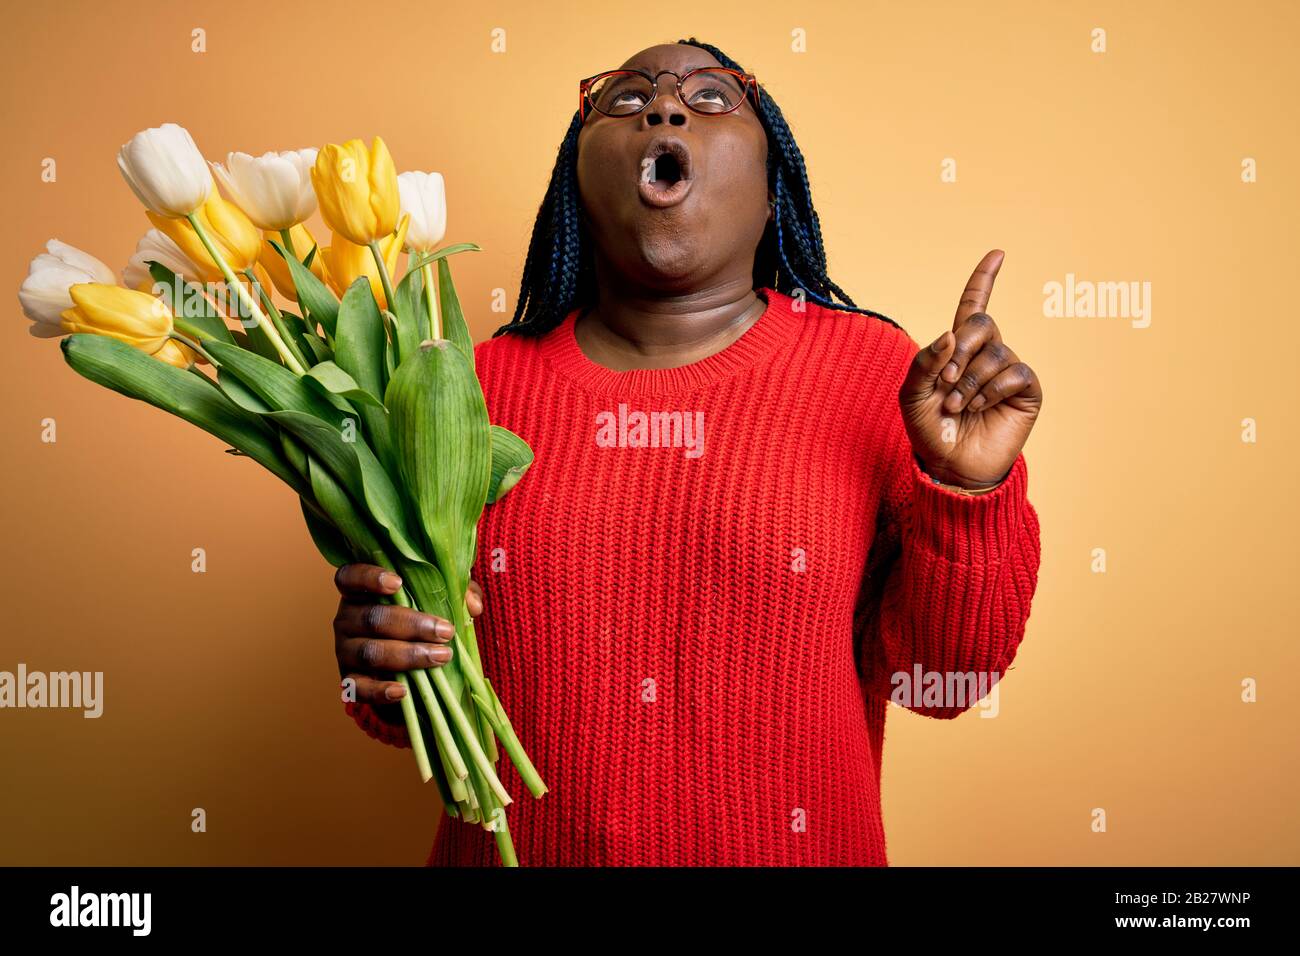 Young african american plus size woman with braids holding bouquet of yellow tulips flower amazed and surprised looking up and pointing with fingers a Stock Photo